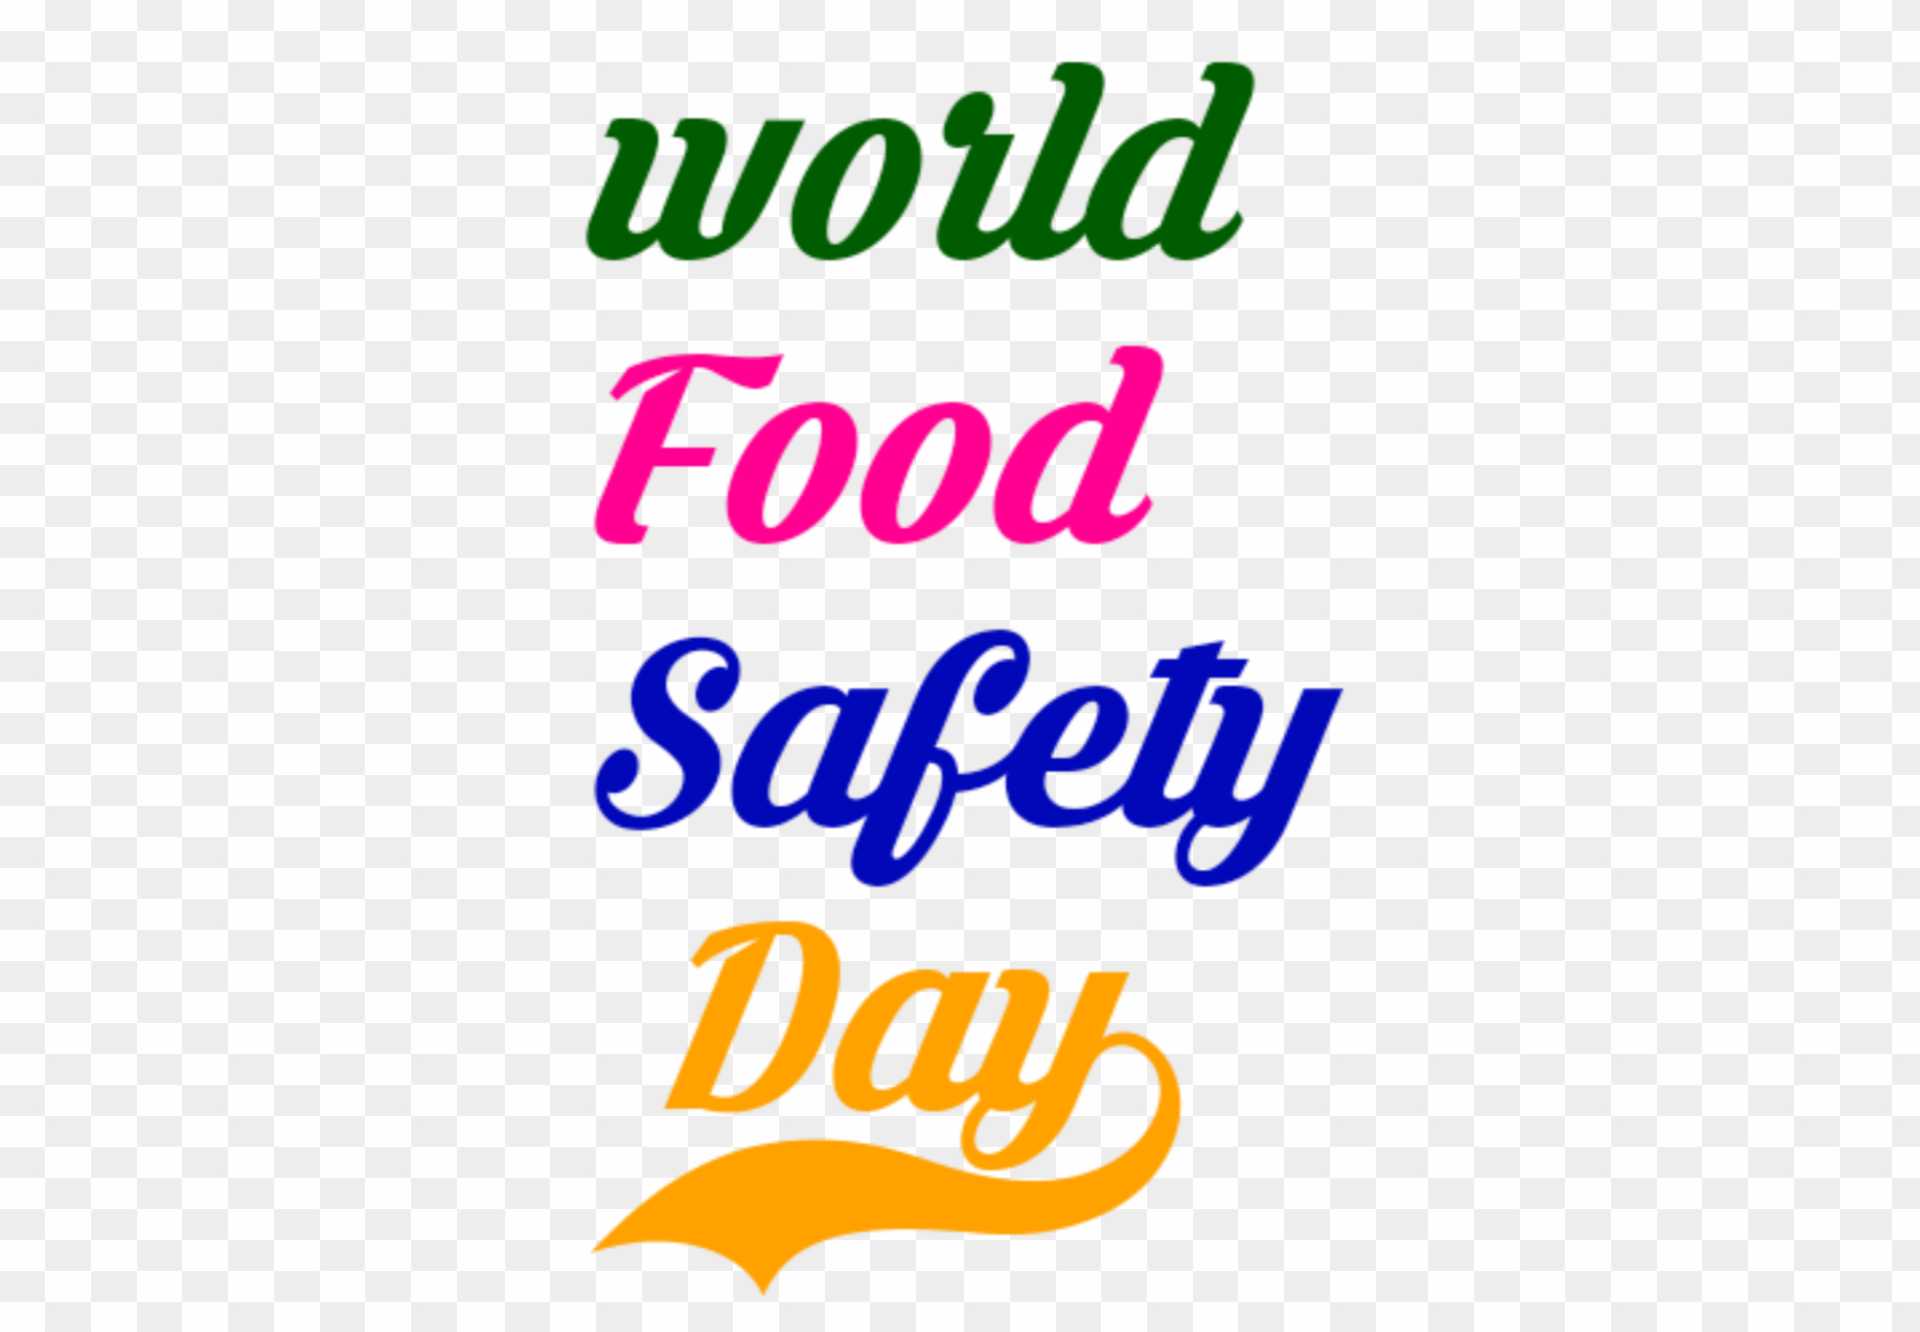 world food safety Day text png images